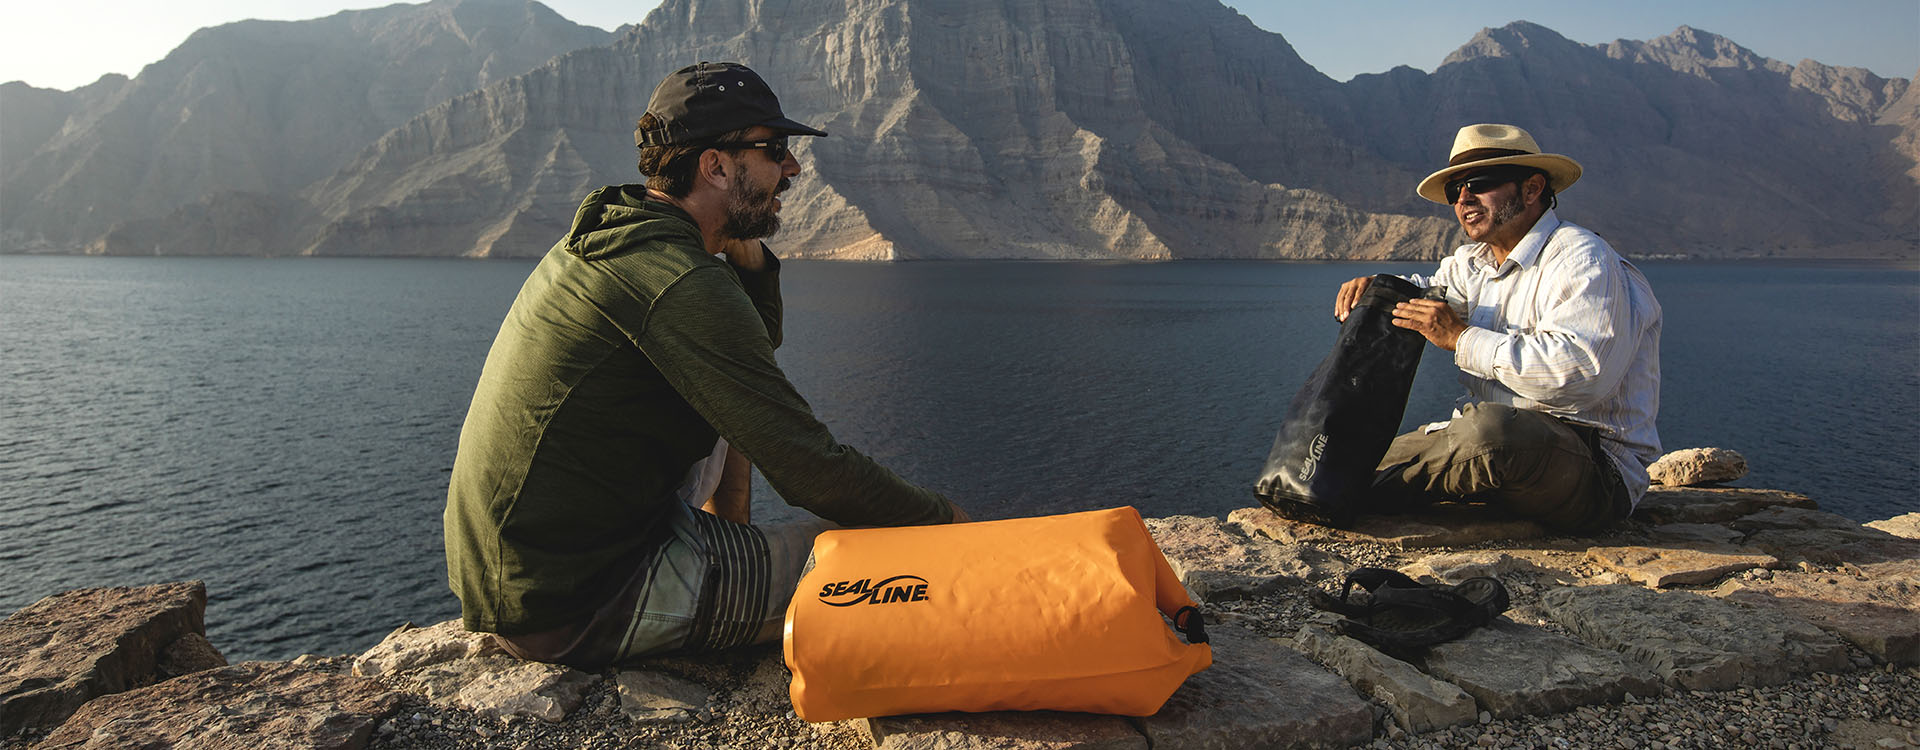 Stay-dry Gear Protection - Reliable, packable dry bags for every adventure.